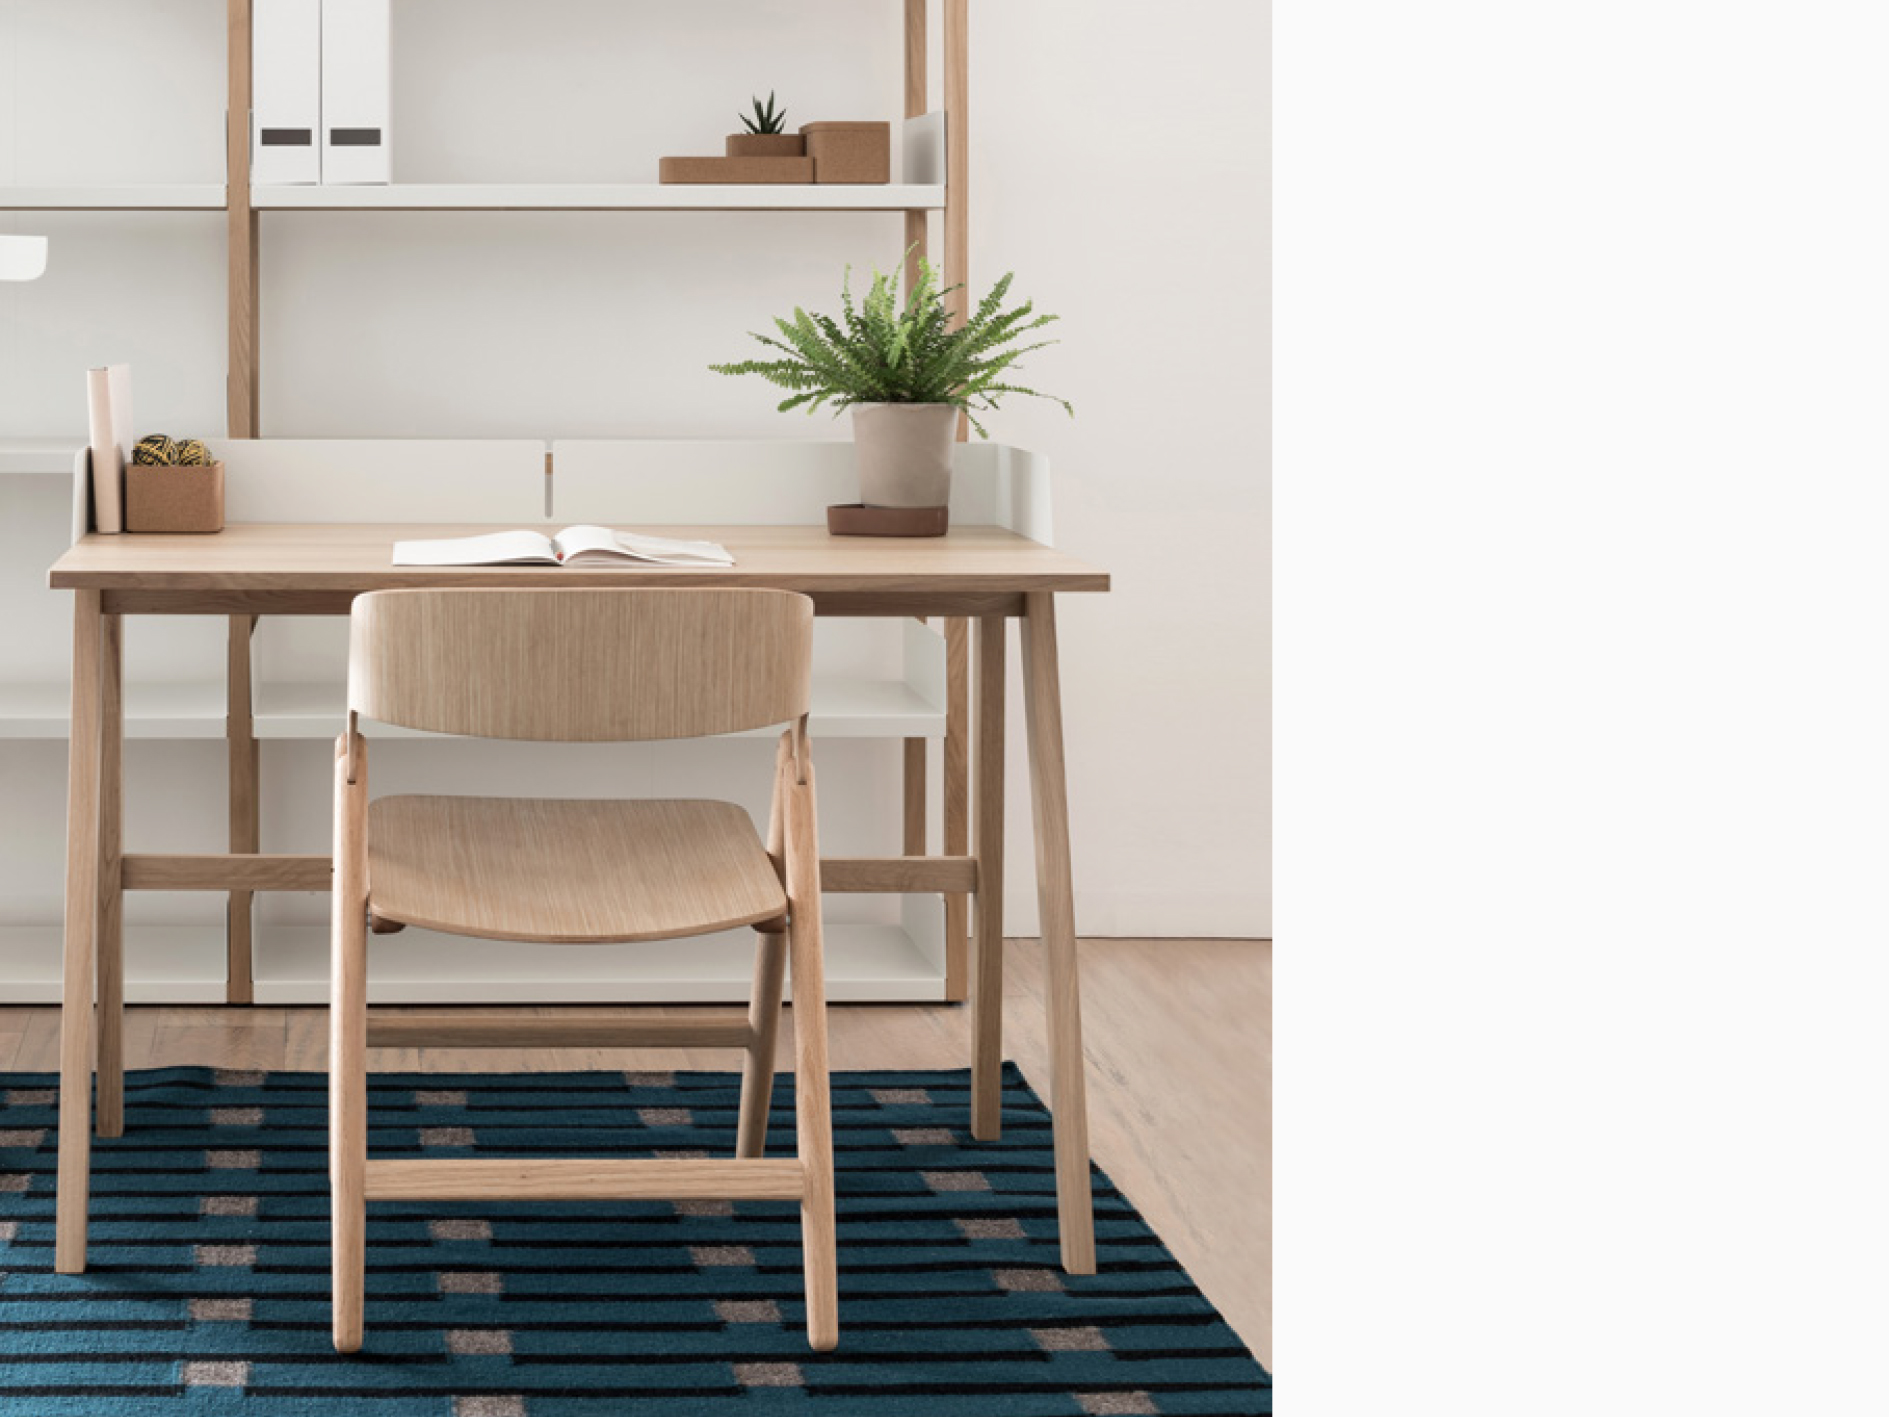 6.Eleanor_Pritchard_for_Case_Purlin_Rug_with_Matthew_Hilton_Brockwell_Desk_and_David_Irwin_Narin_Chair_and_Marina_Bautier_Lap_Shelving.jpg